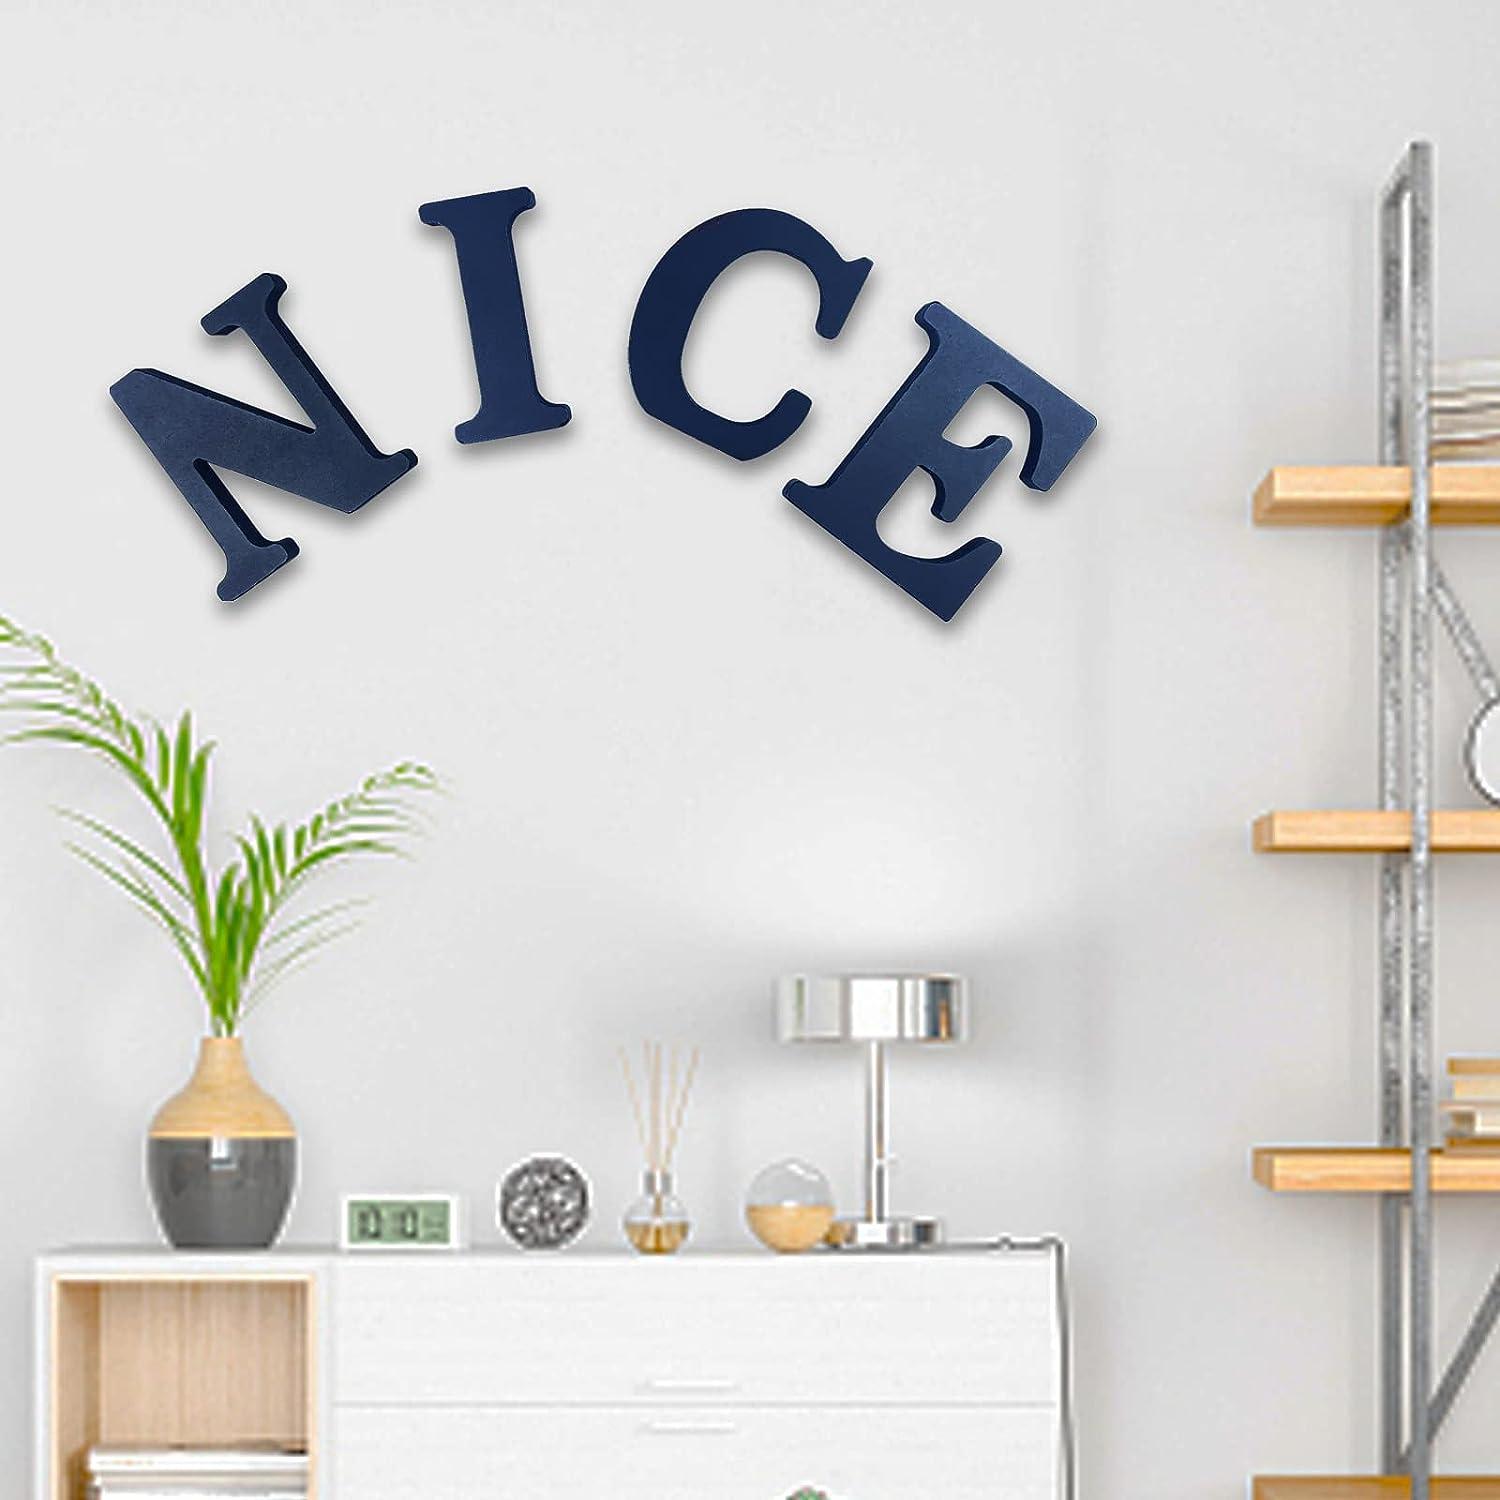 AOCEAN 4 inch White Wood Letters Unfinished Wood Letters for Wall Decor Decorative Standing Letters Slices Sign Board Decoration for Craft Home